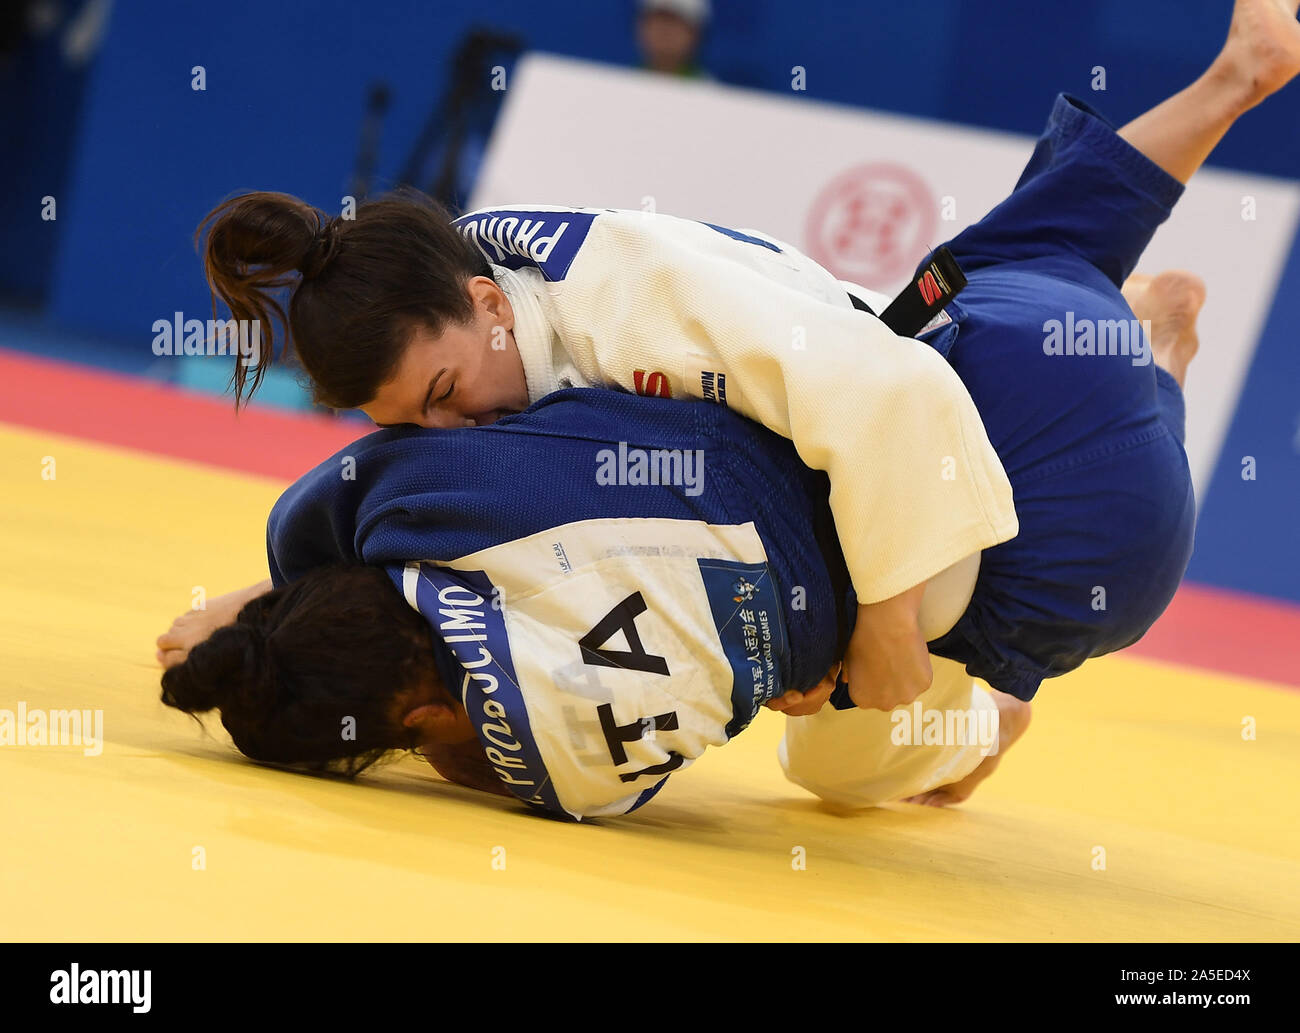 Wuhan, China's Hubei Province. 20th Oct, 2019. Alena Prokopenko (up) of Russia competes with Alessandra Prosdocimo of Italy during the women's 70kg judo final at the 7th International Military Sports Council (CISM) Military World Games in Wuhan, capital of central China's Hubei Province, Oct. 20, 2019. Credit: Li He/Xinhua/Alamy Live News Stock Photo